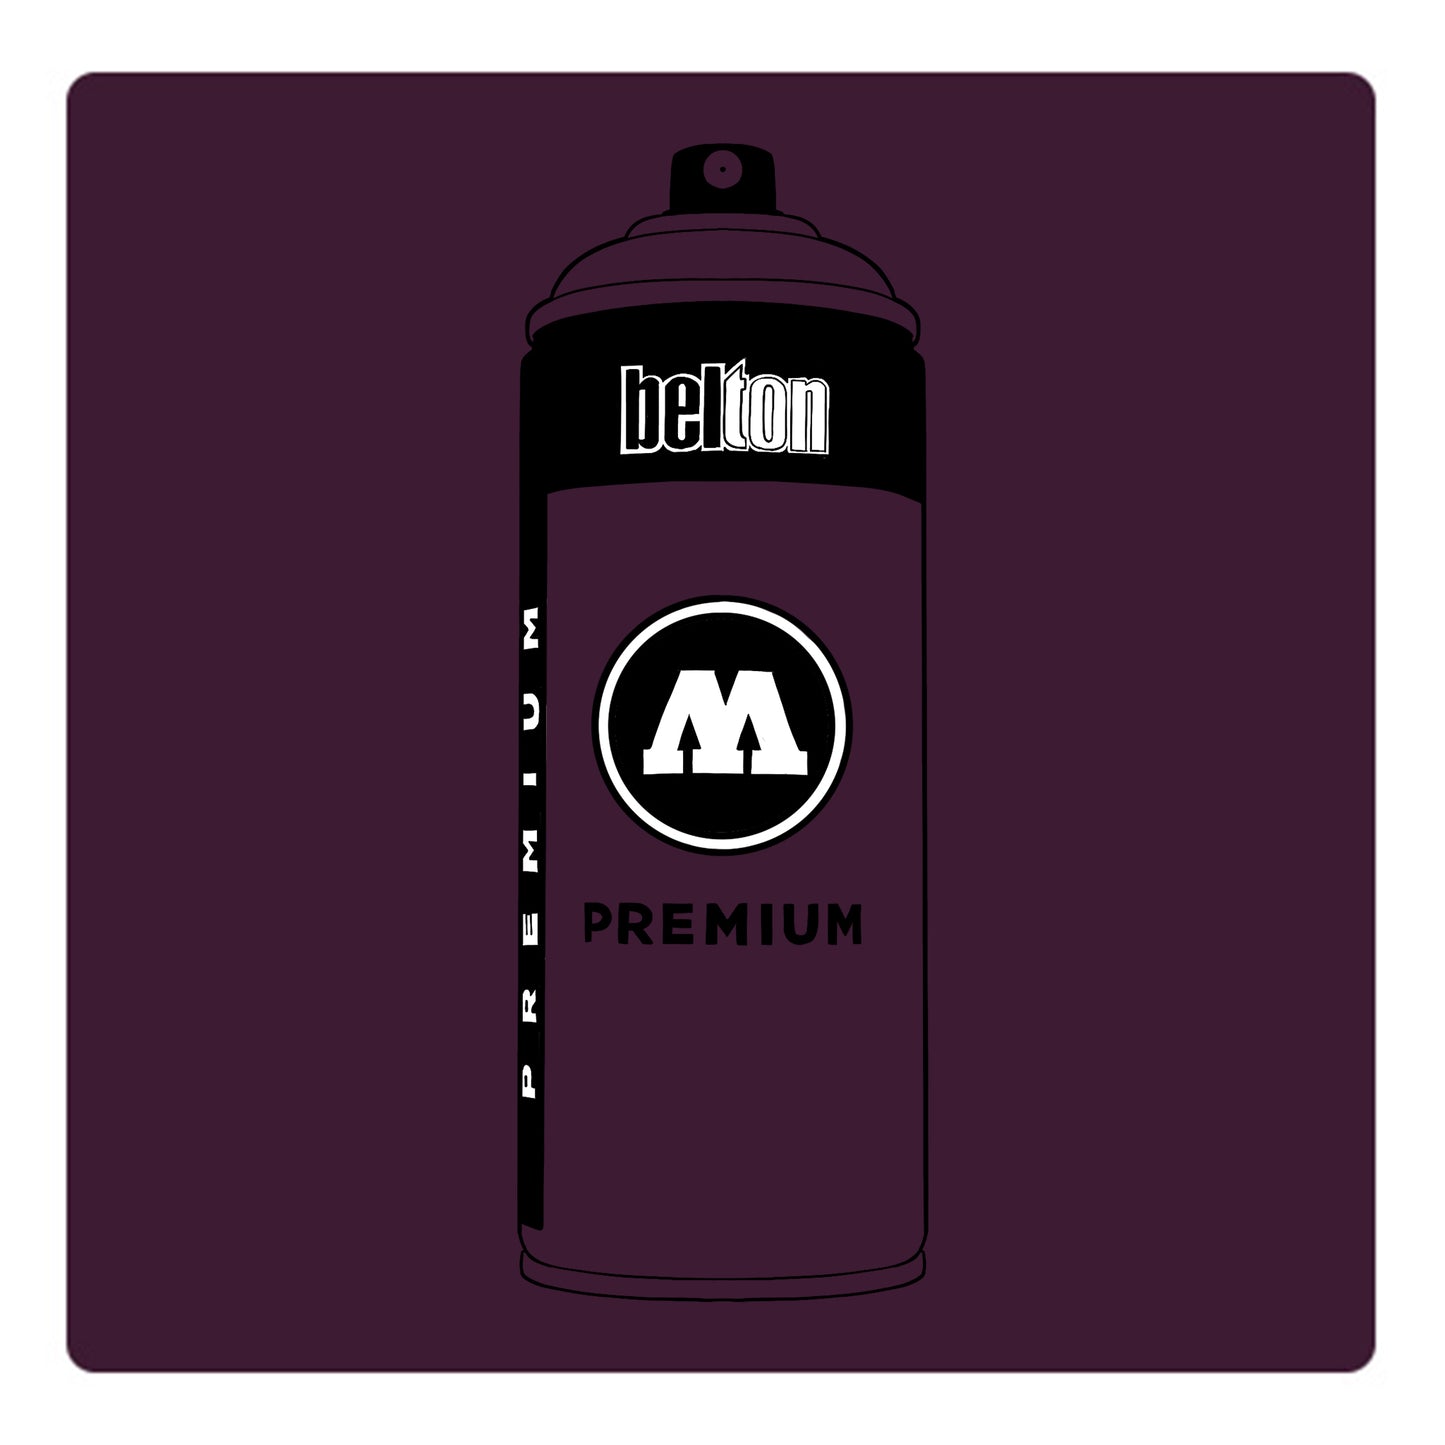 A black outline drawing of a berry purple spray paint can with the words "belton","premium" and the letter"M" written on the face in black and white font. The background is a color swatch of the same berry purple with a white border.